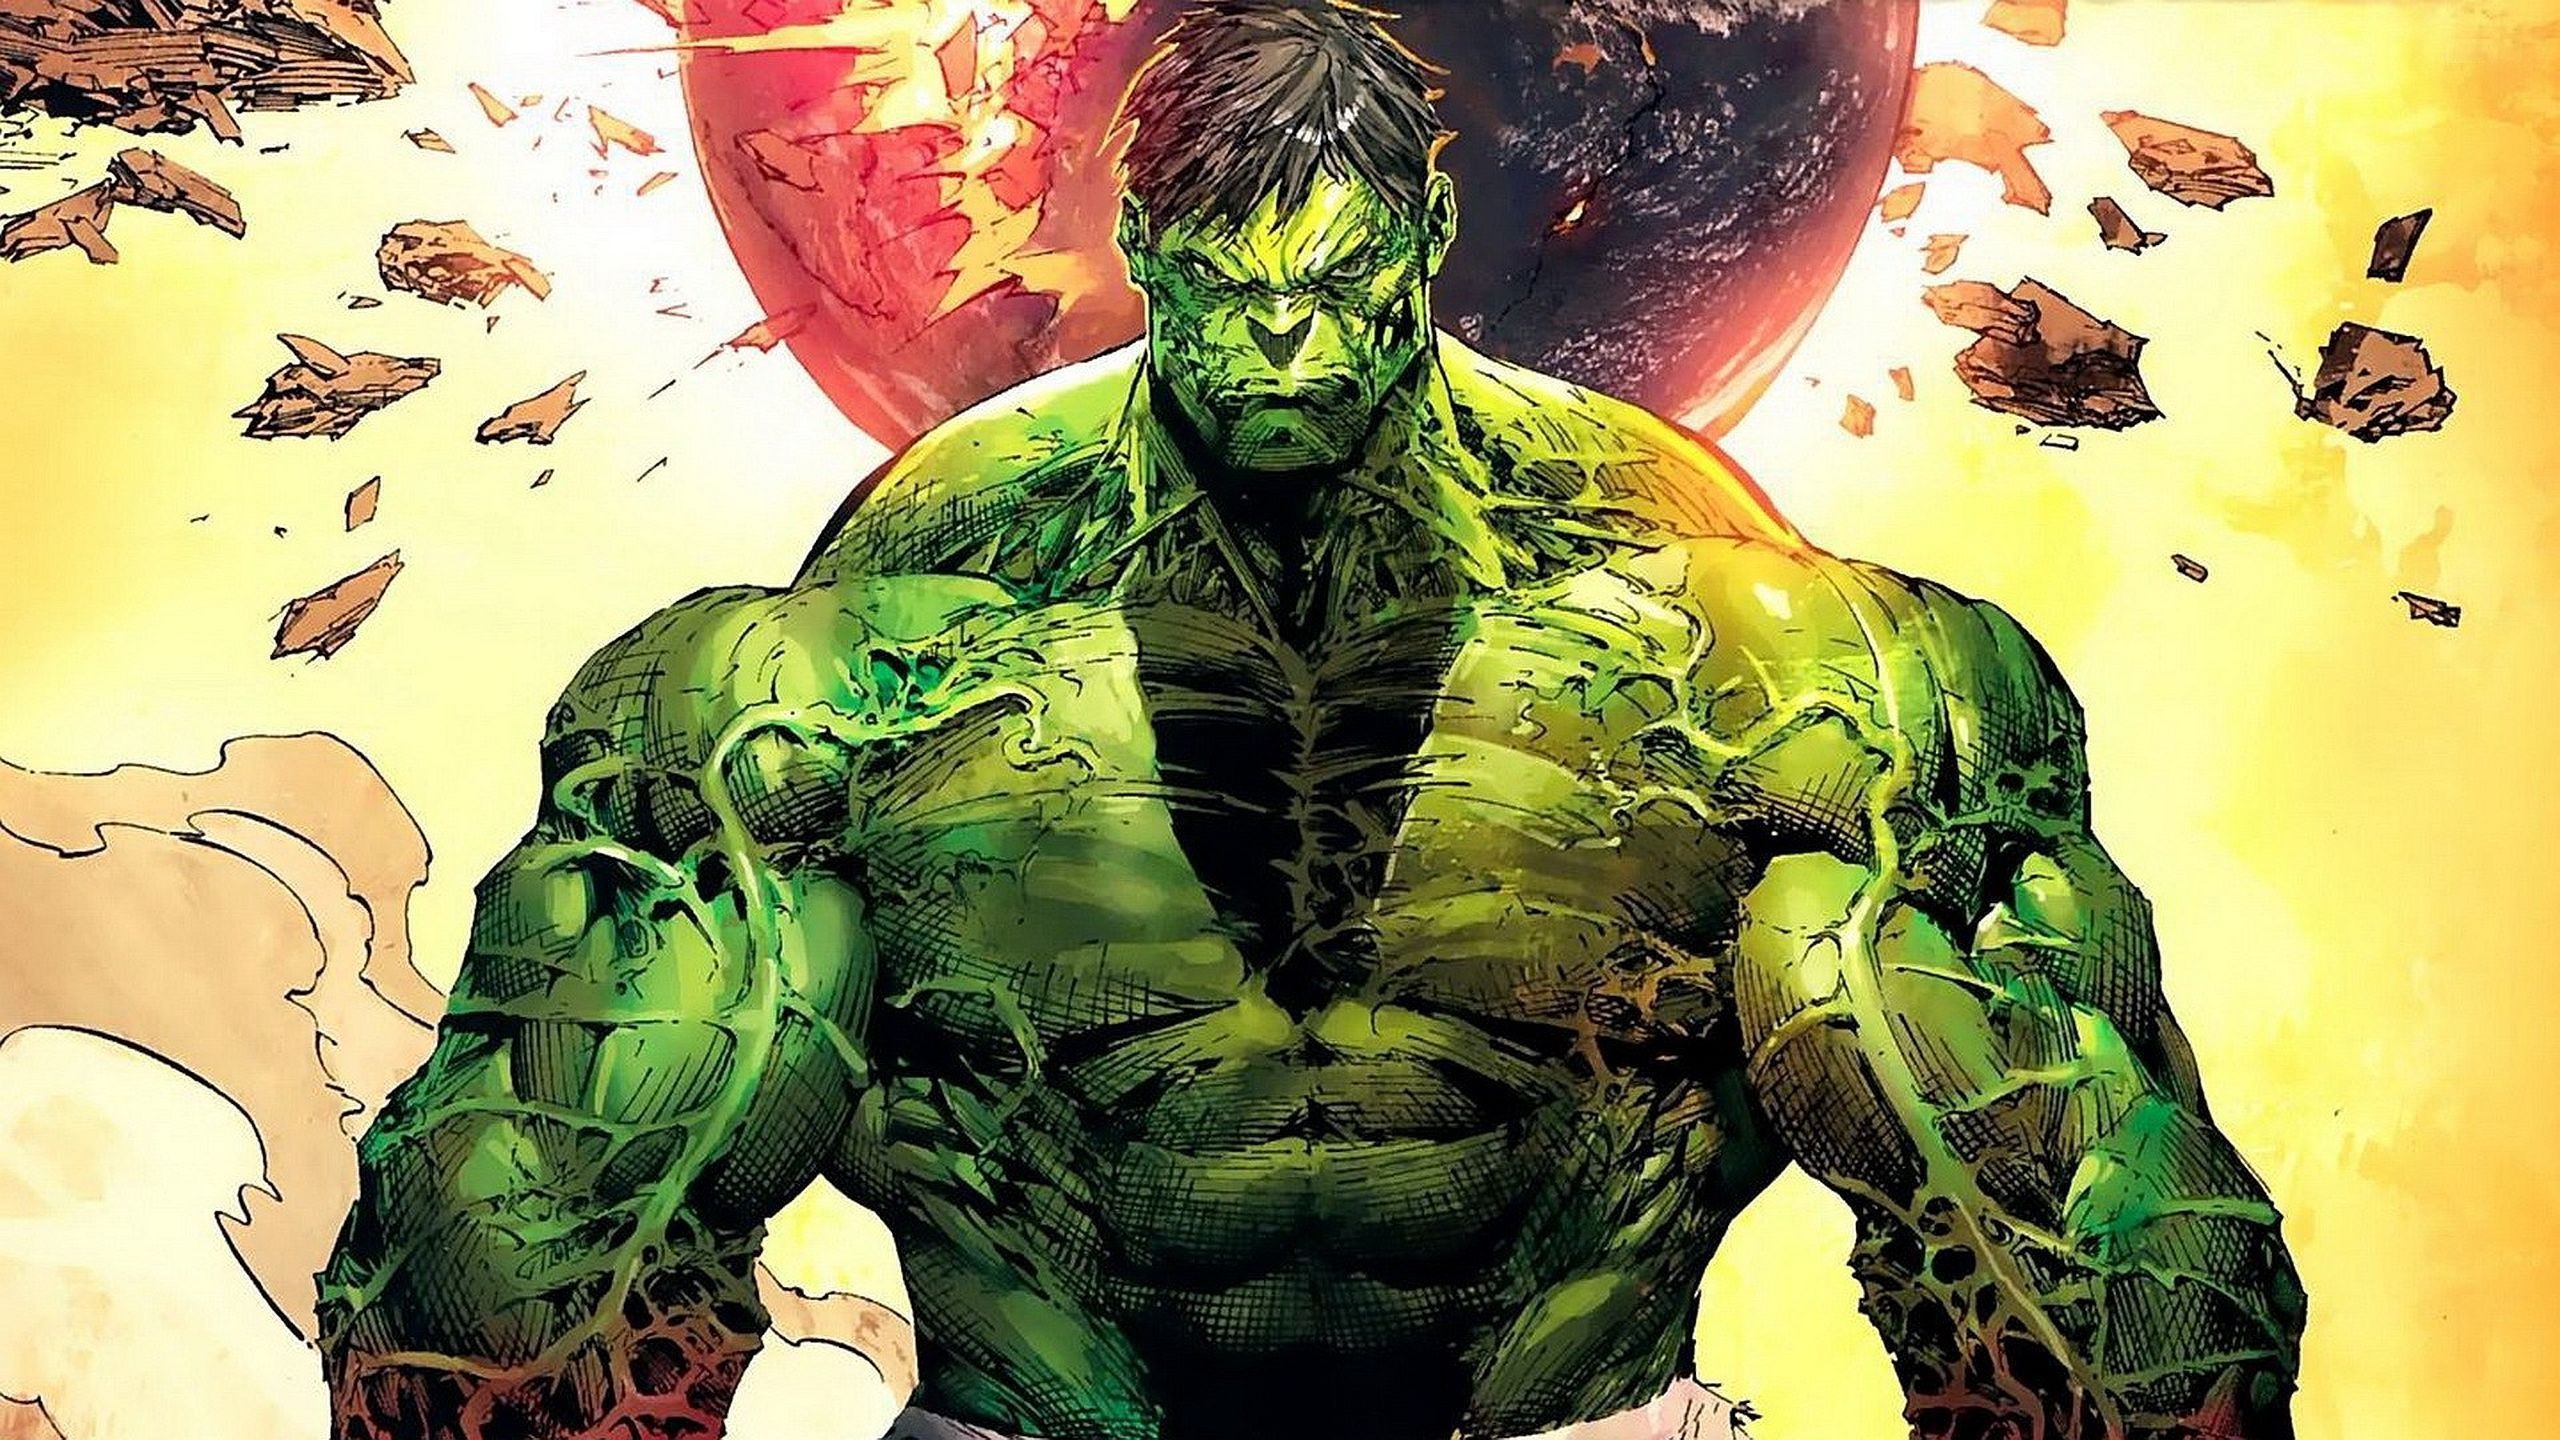 Hulk backgrounds pictures images download.